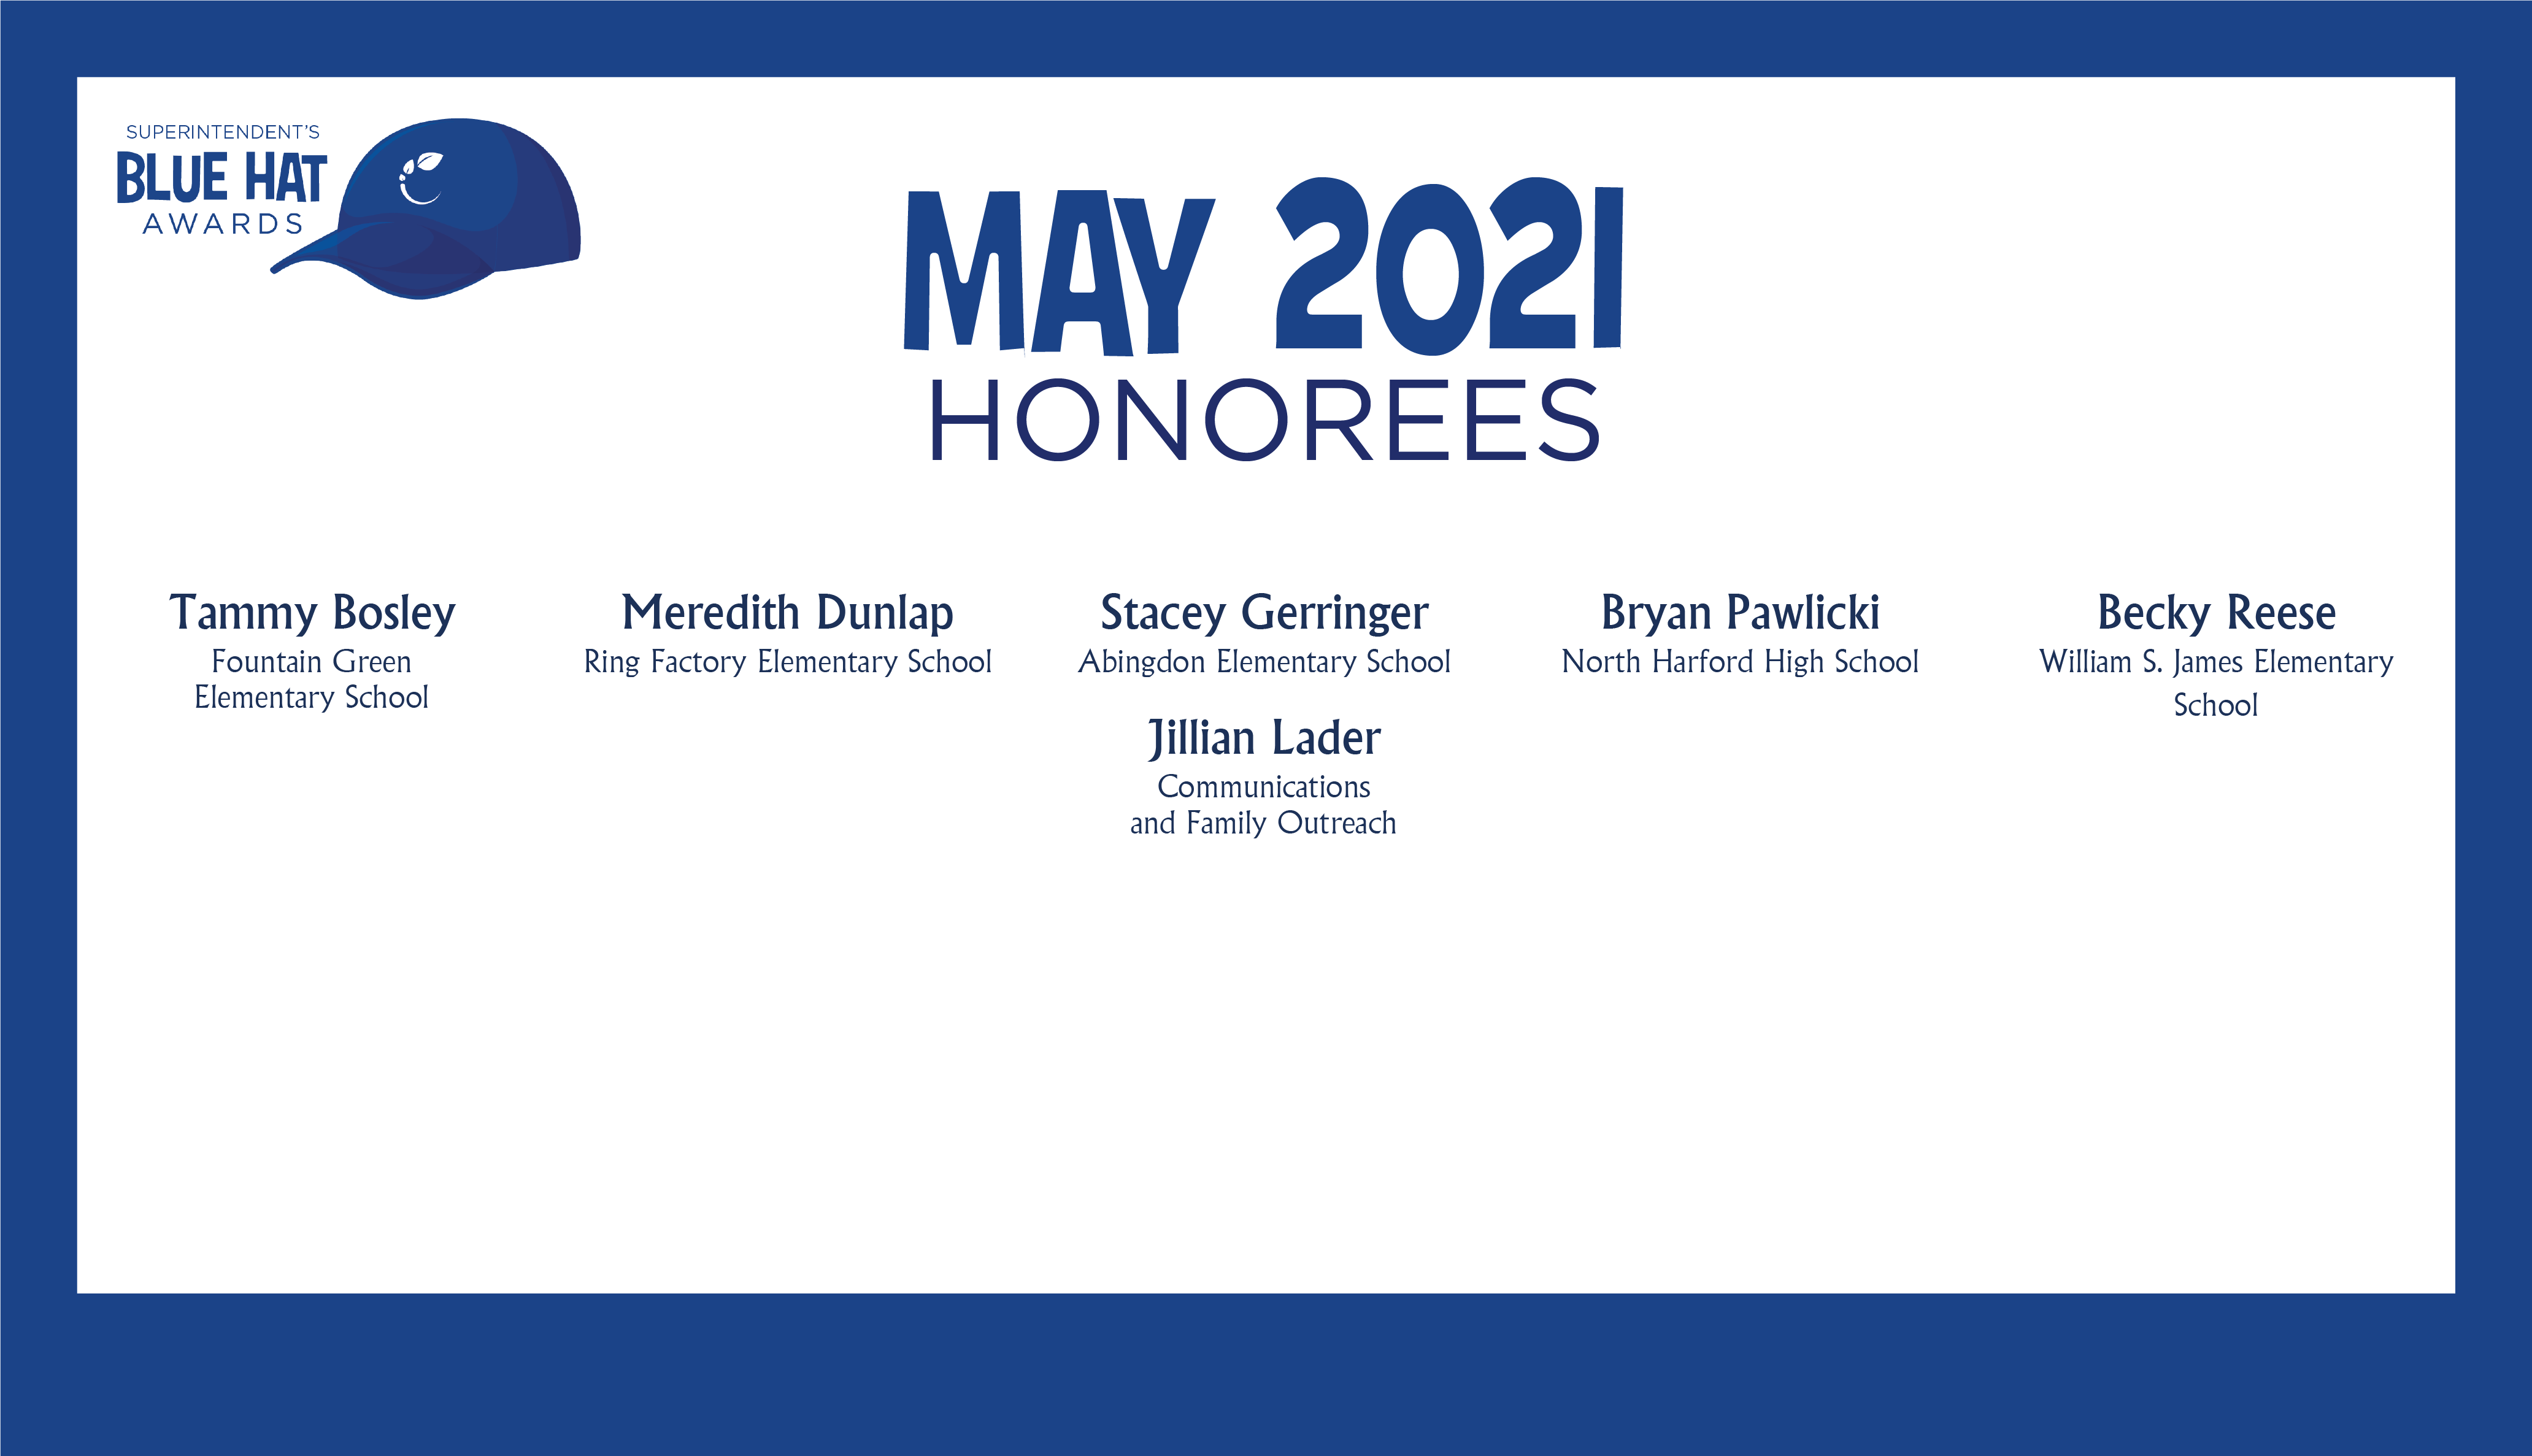 HCPS Blue Hat Honorees - May 2021